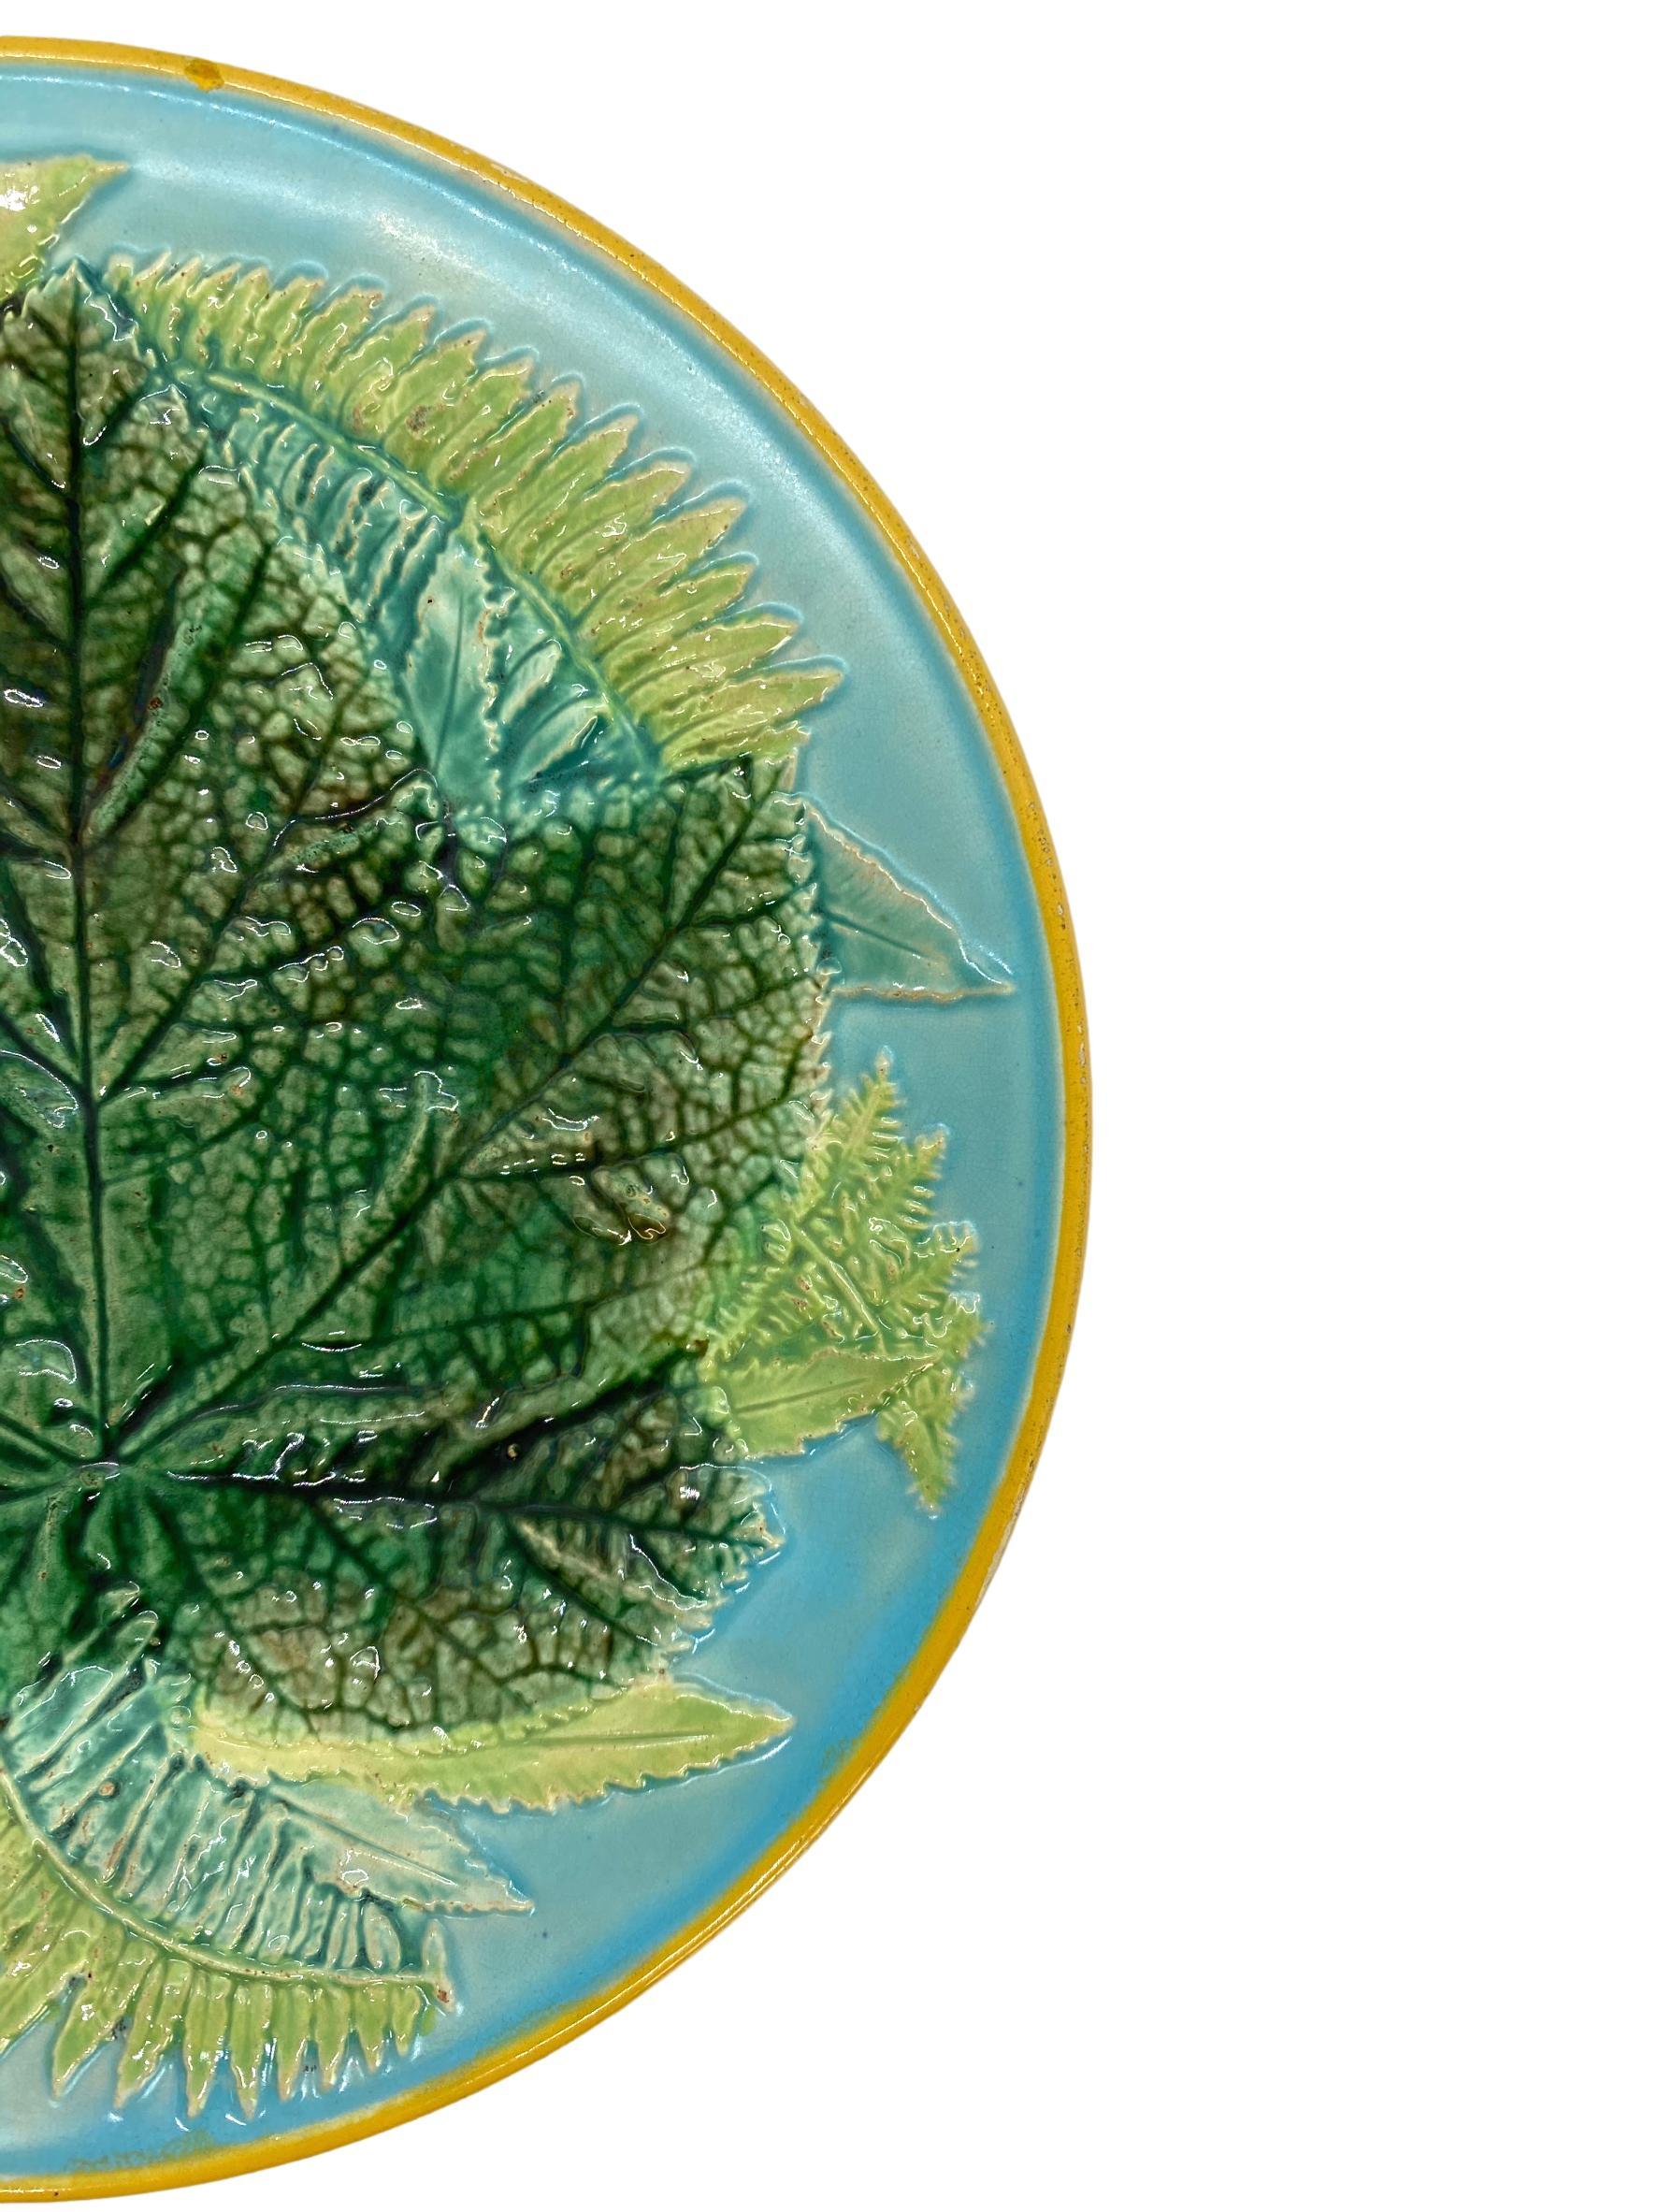 Victorian George Jones Majolica Maple Leaf and Ferns Plate on Turquoise, English, ca. 1873